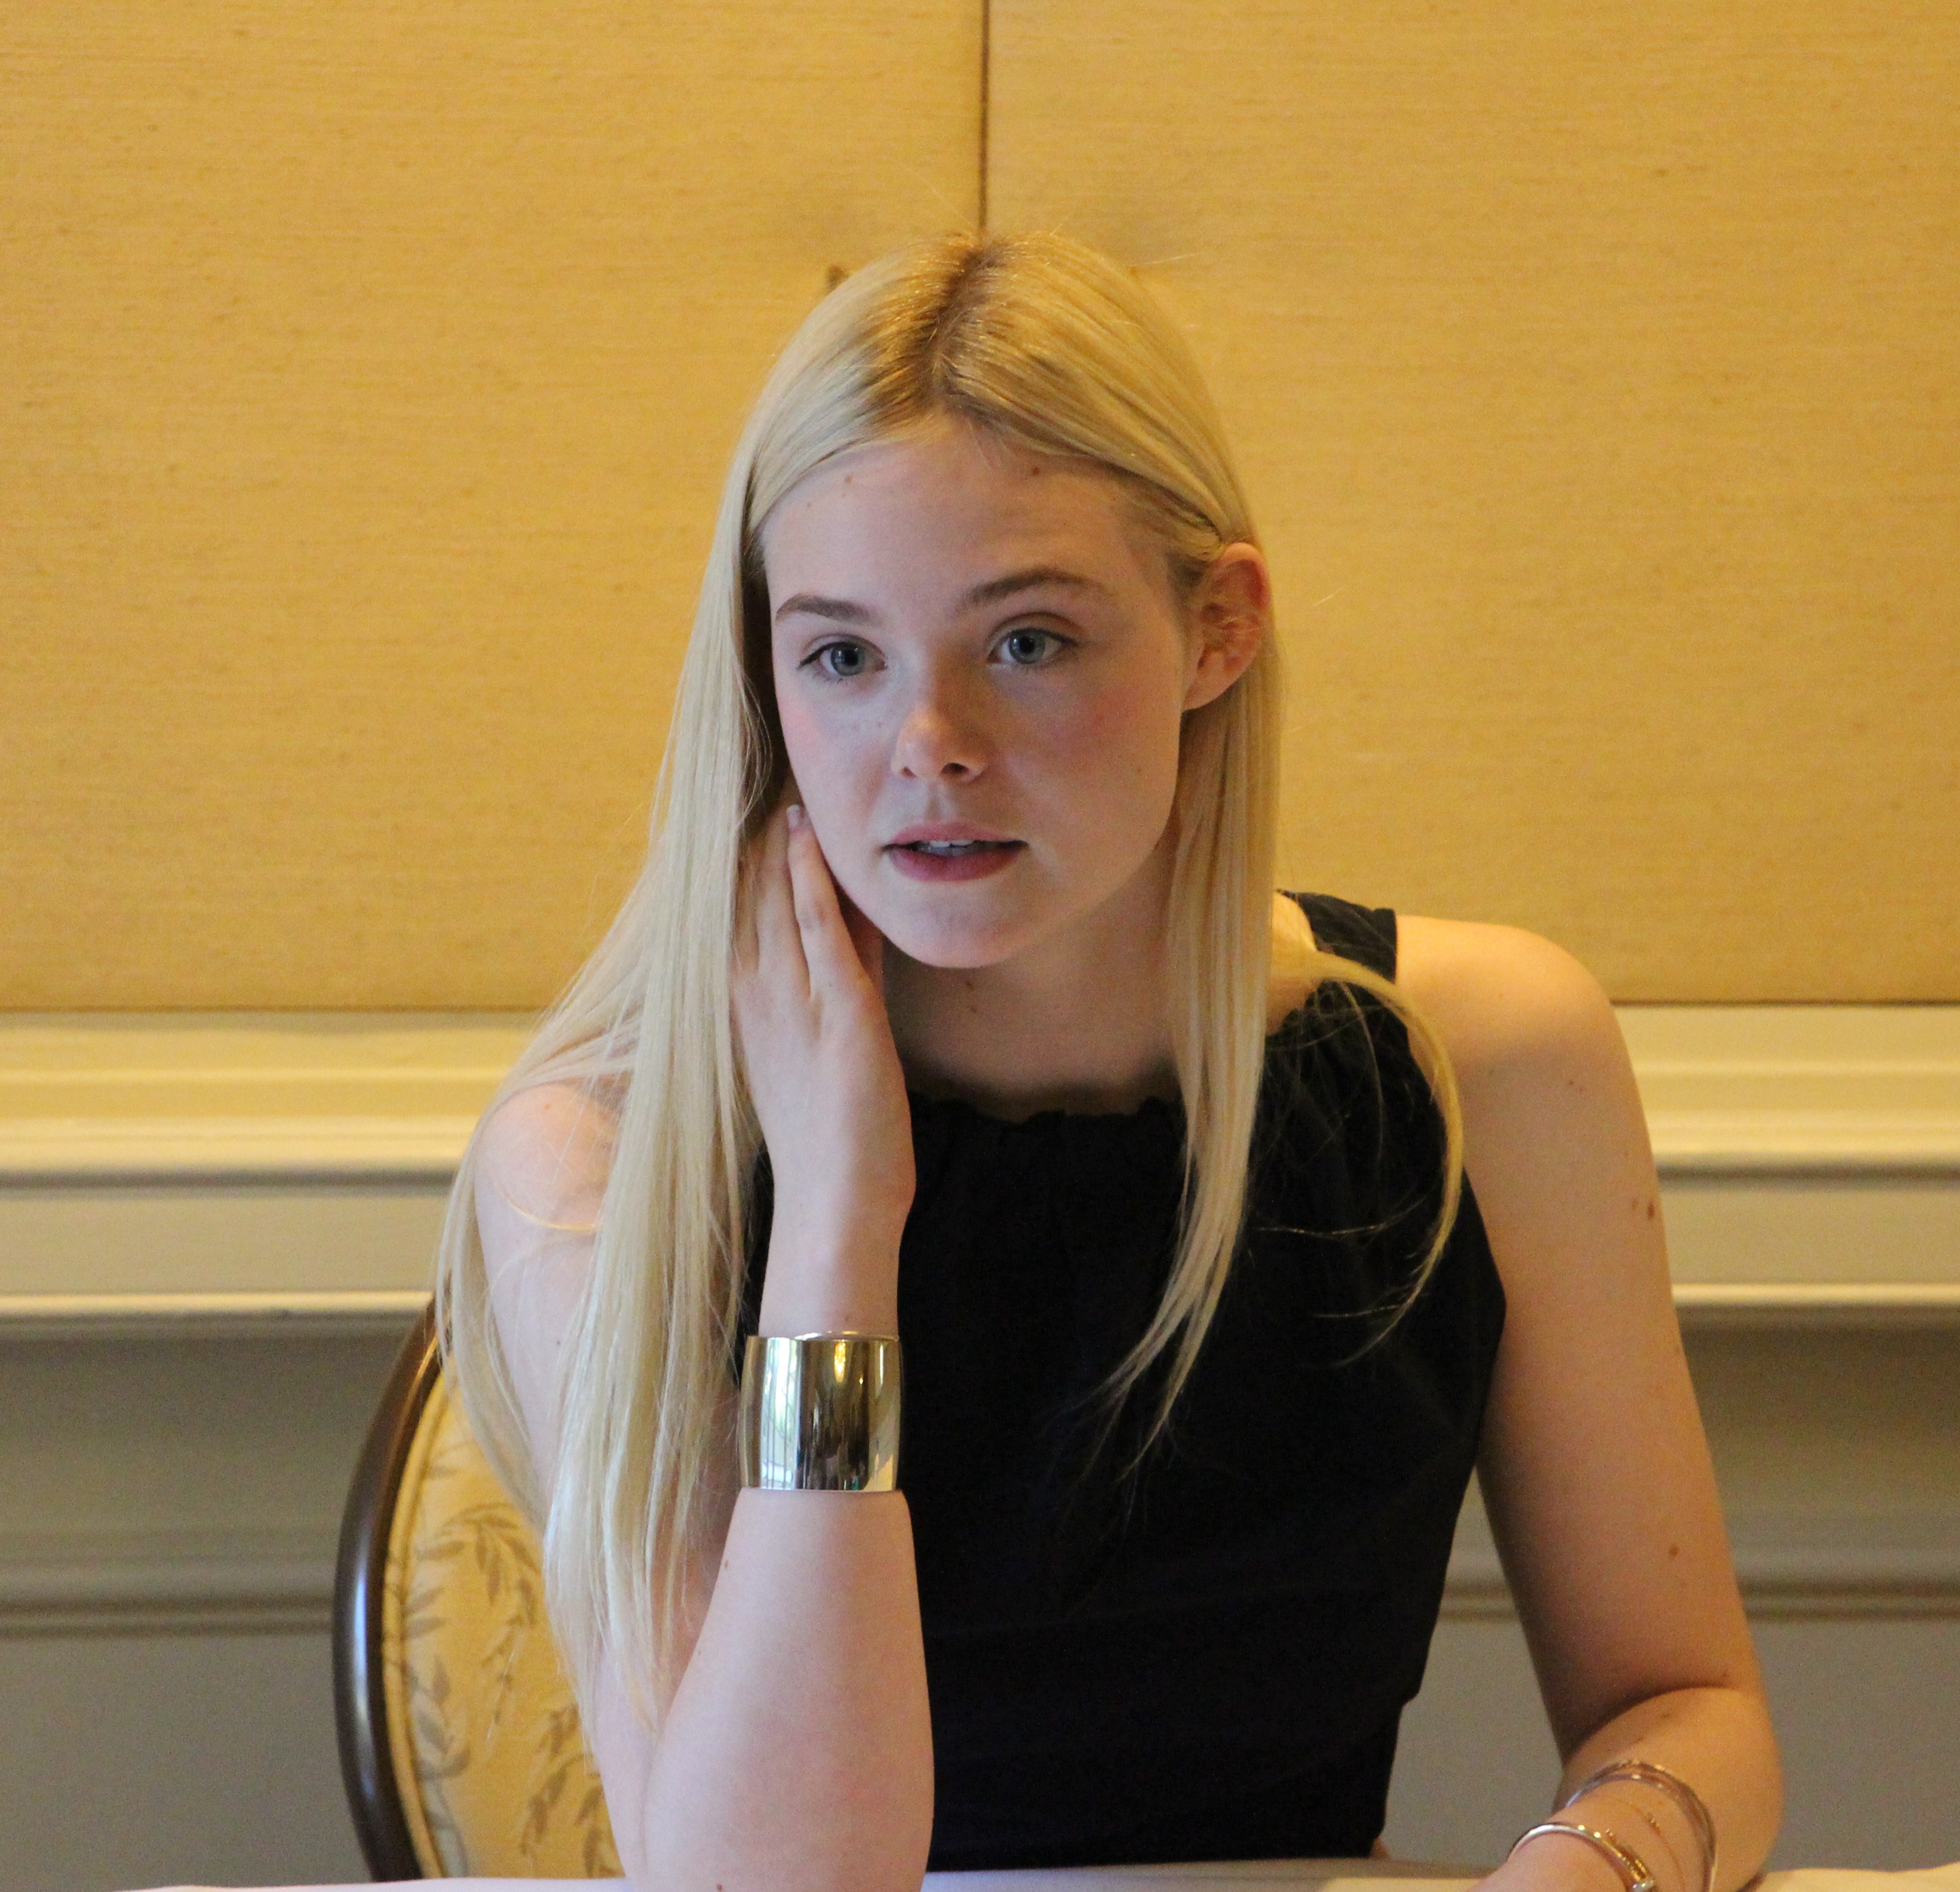 Elle Fanning on Her Role as Princess Aurora in Maleficent ...